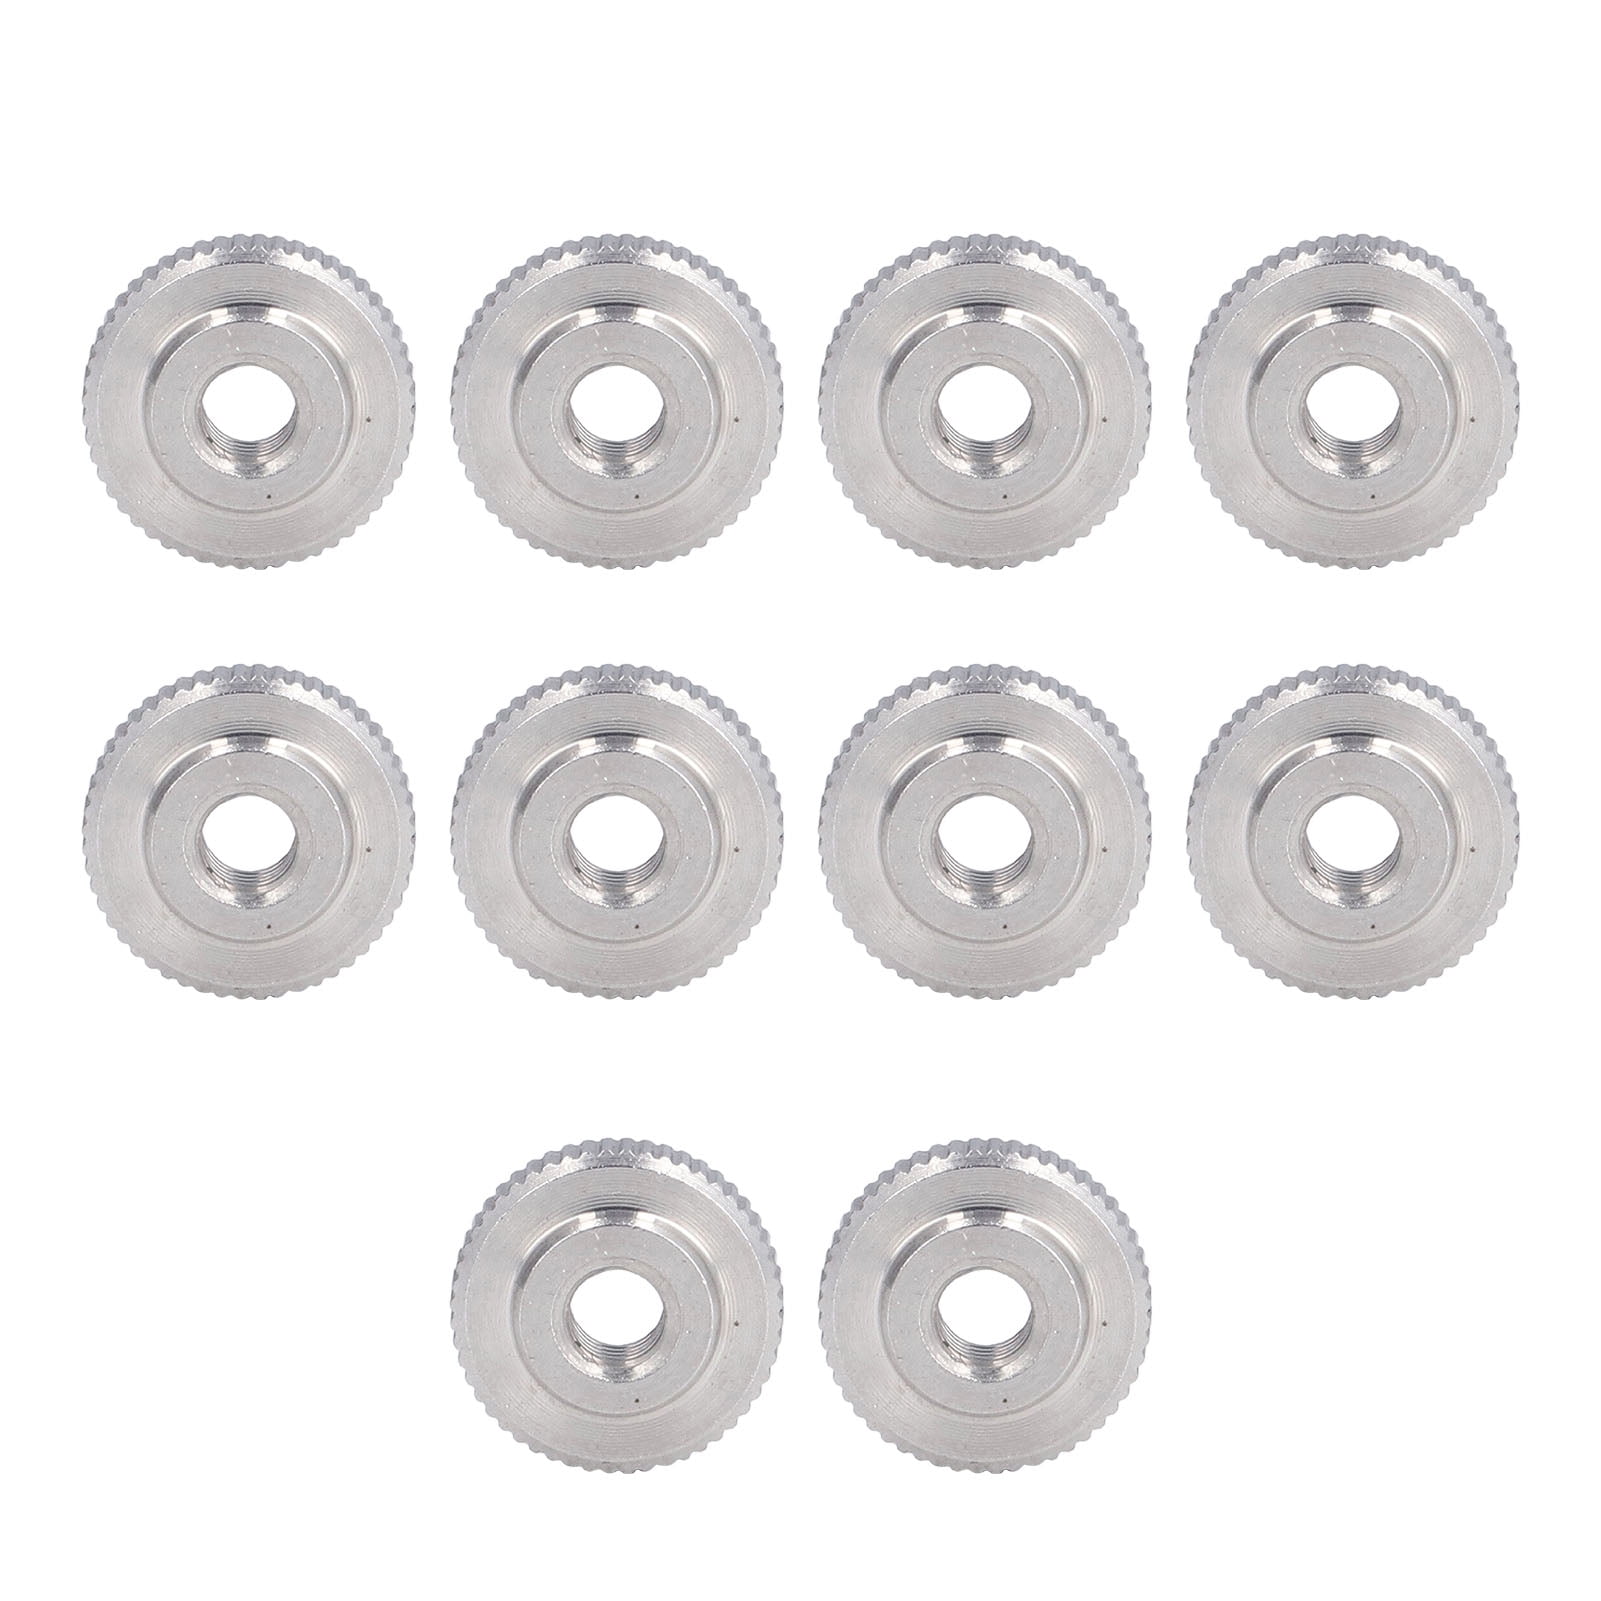 5 Pcs M3 304 Stainless Steel Knurled Thumb Nuts for 3D Printer Heated Bed 